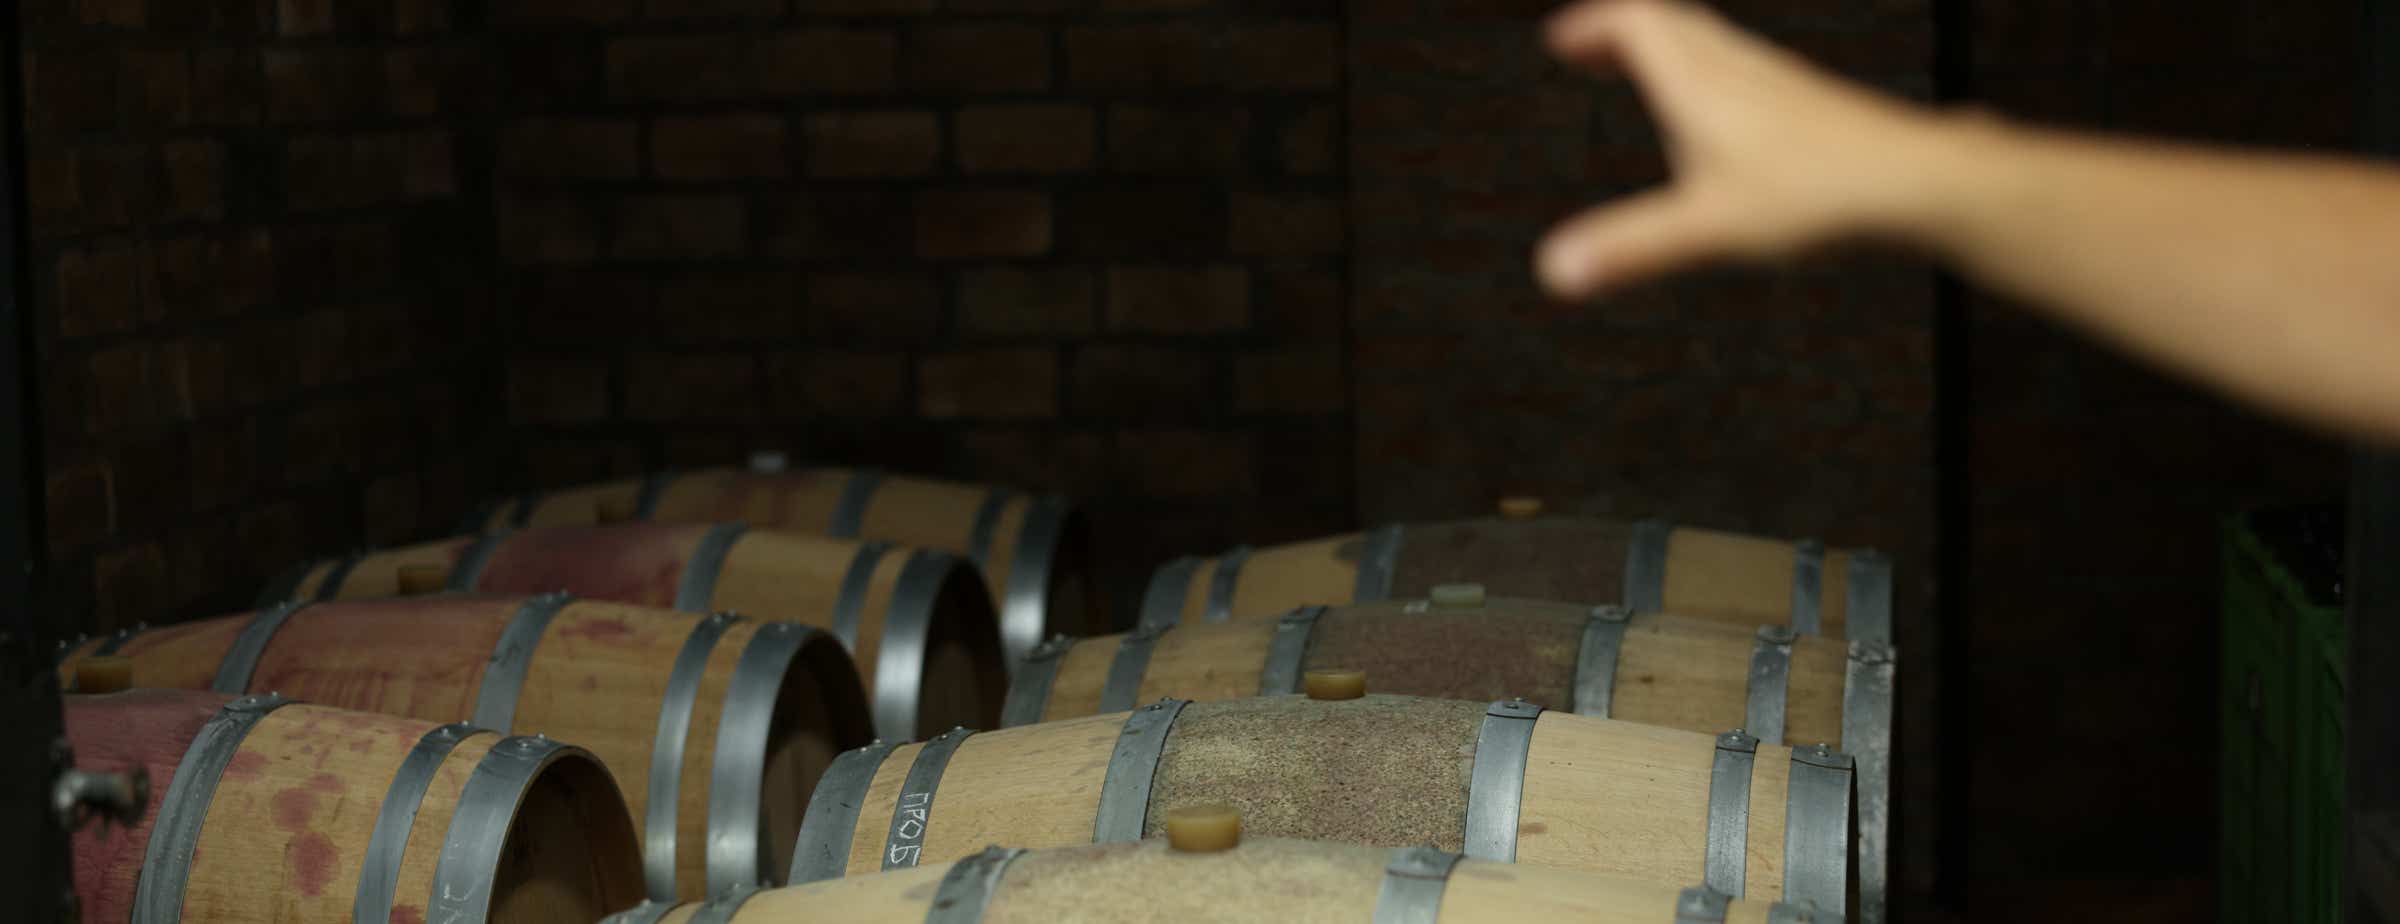 The picture shows a total of eight barrels in a wine cellar. A hand points to these barrels out of focus in the foreground. A red discolouration can be seen around the corked holes for filling.